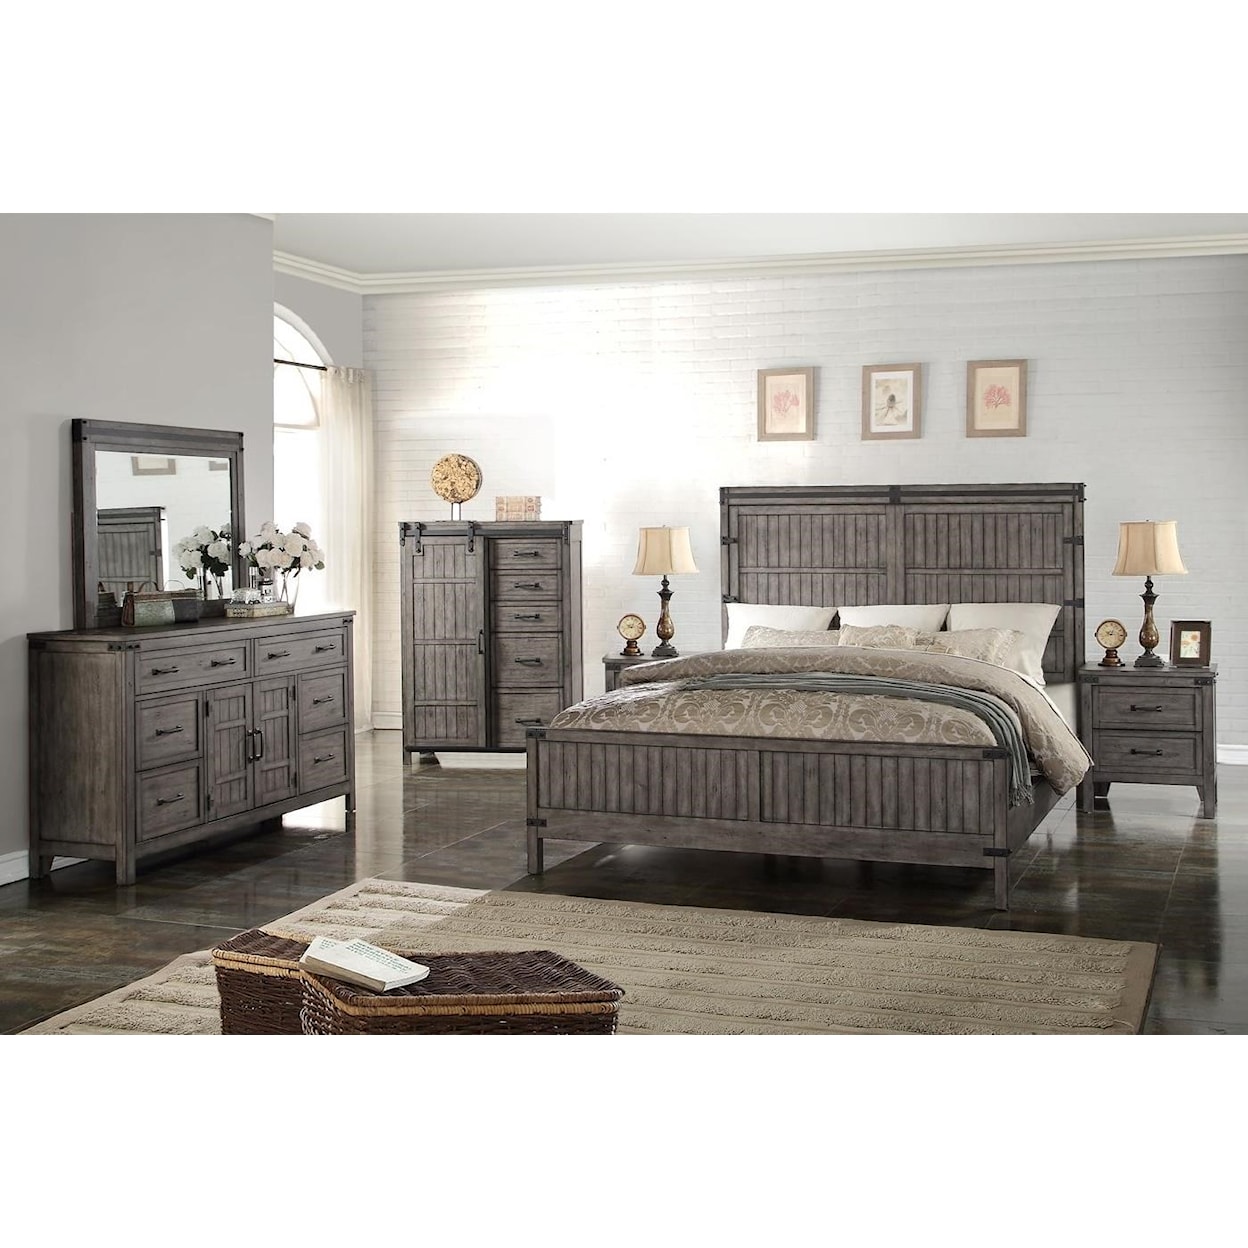 Legends Furniture Storehouse Collection Queen Bedroom Group